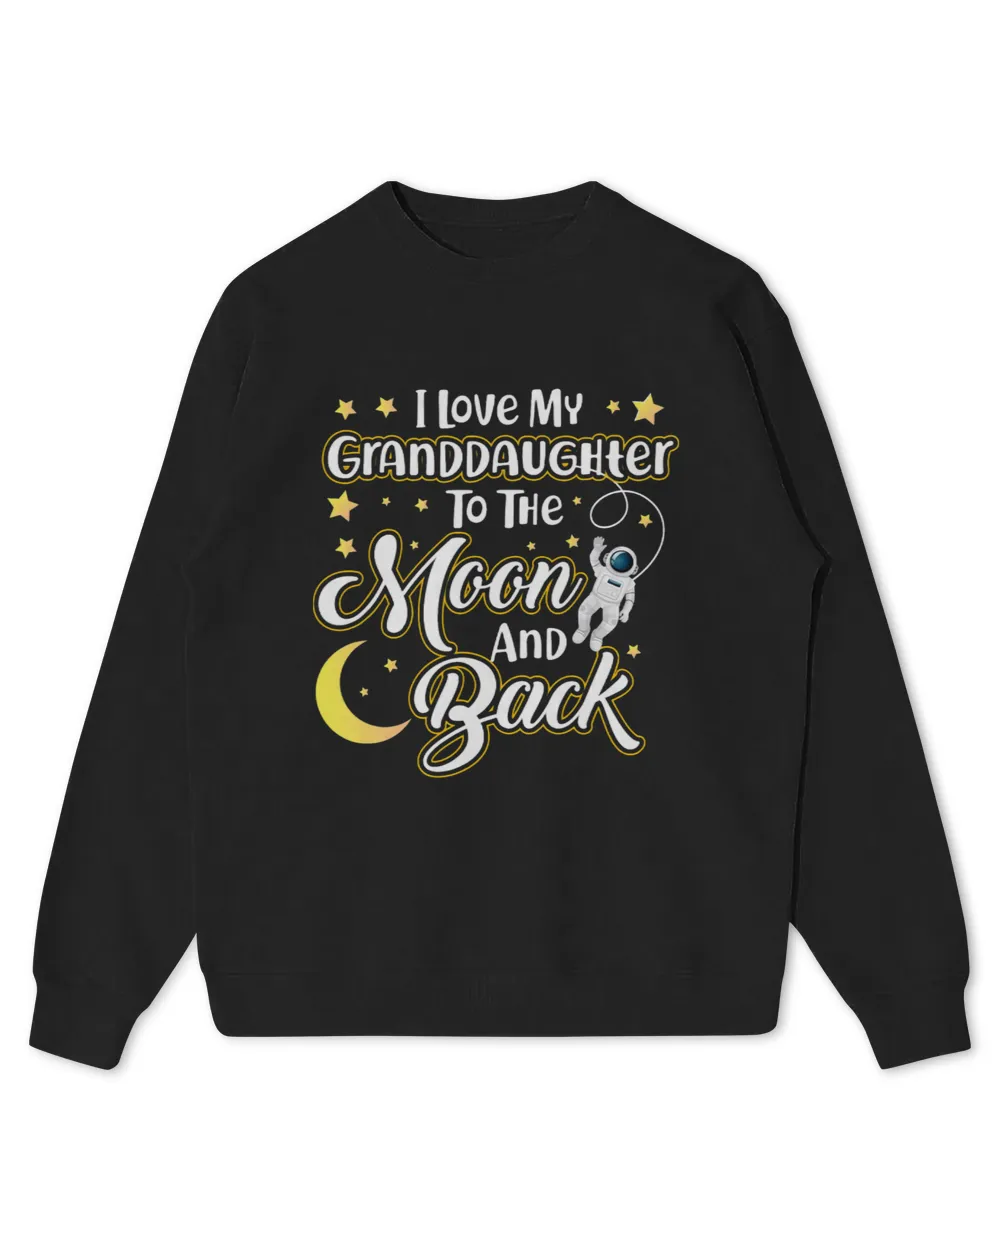 I Love My Granddaughter To The Moon And Back Funny Quote Tee